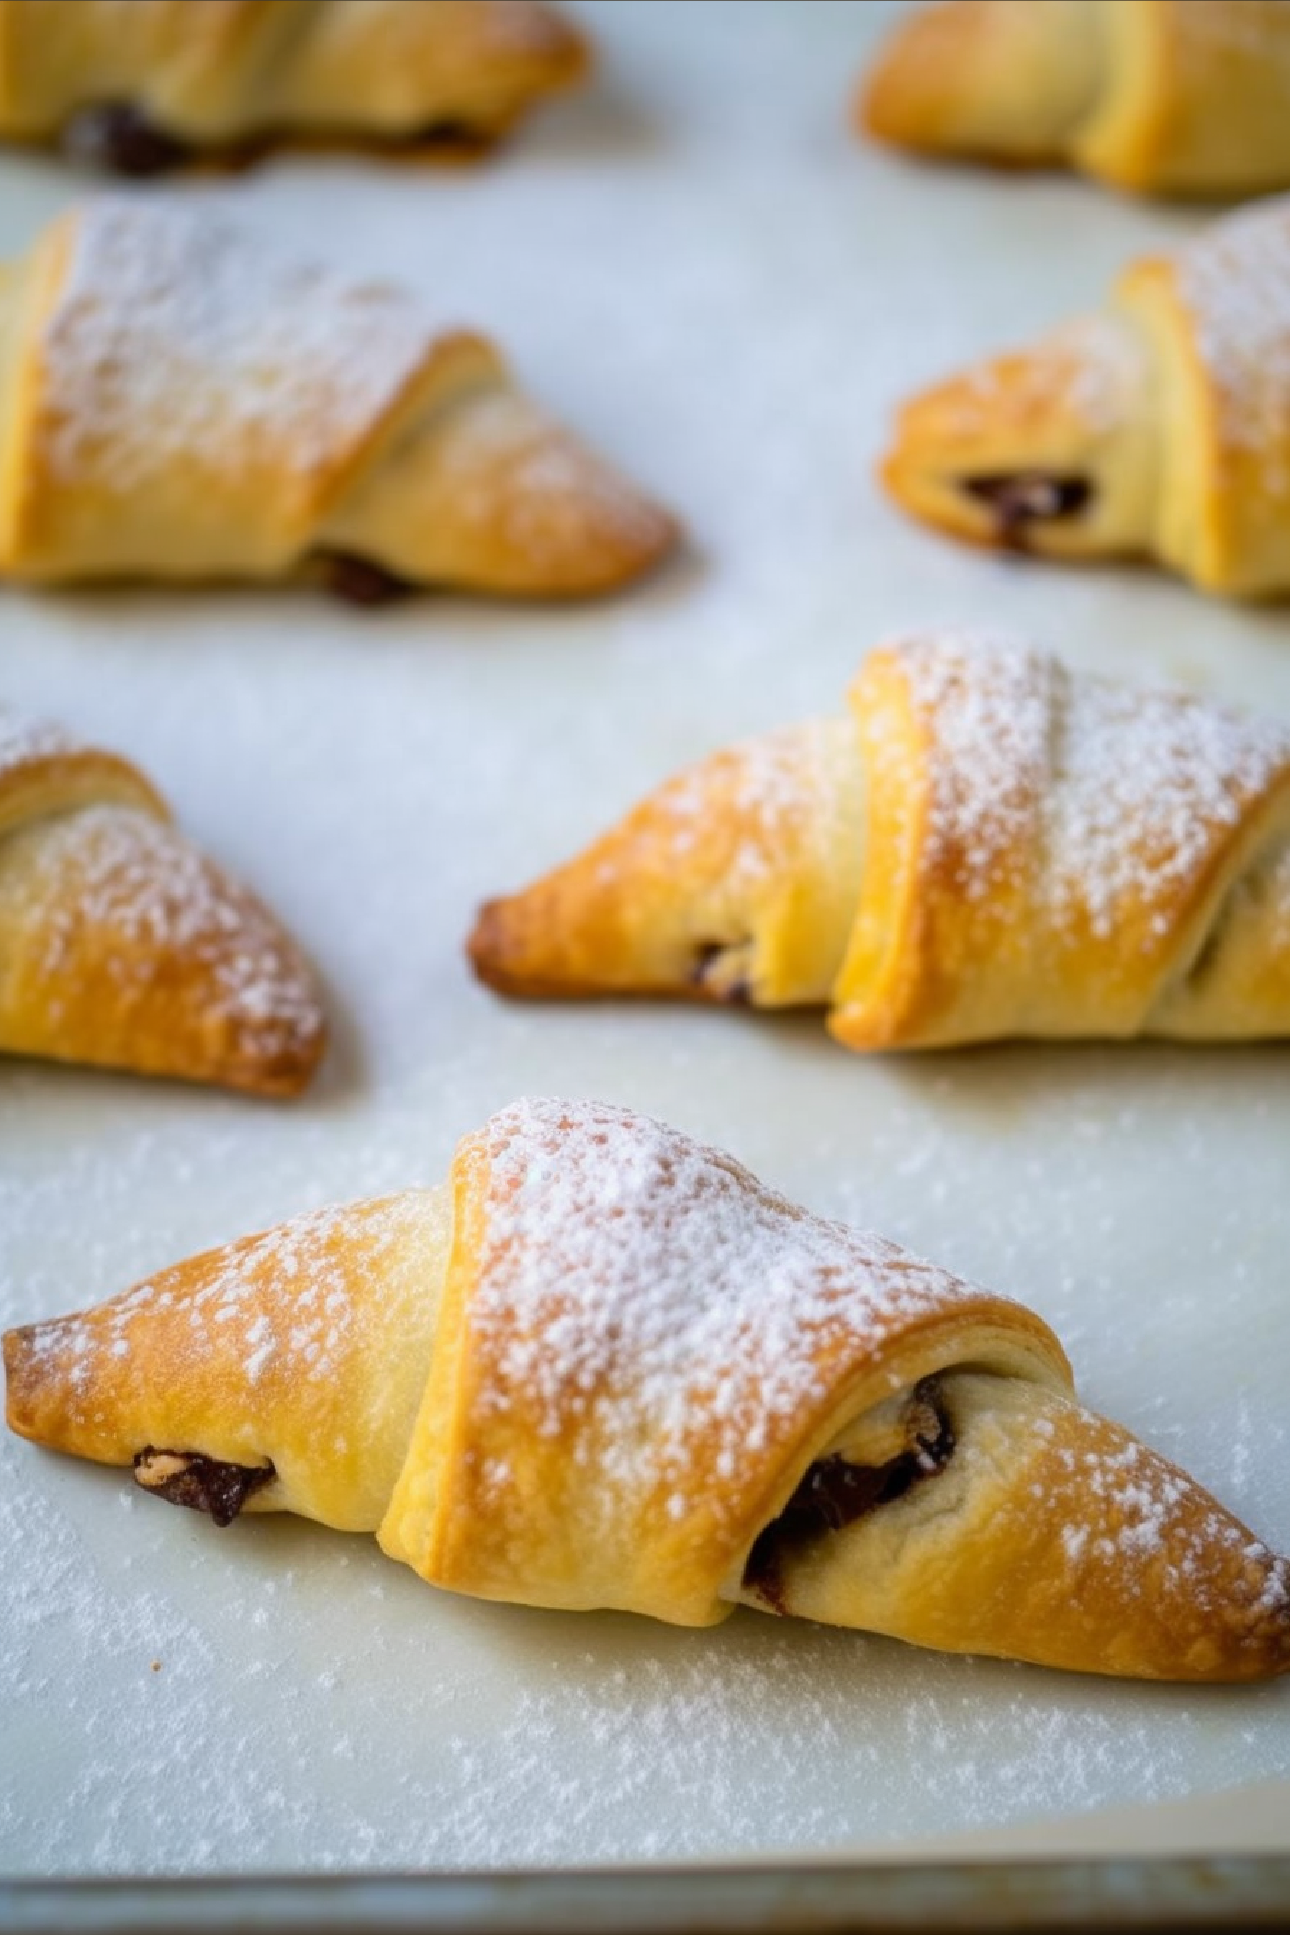 Get your kids involved in the kitchen with this fun and easy chocolate crescents recipe – a treat they'll love!